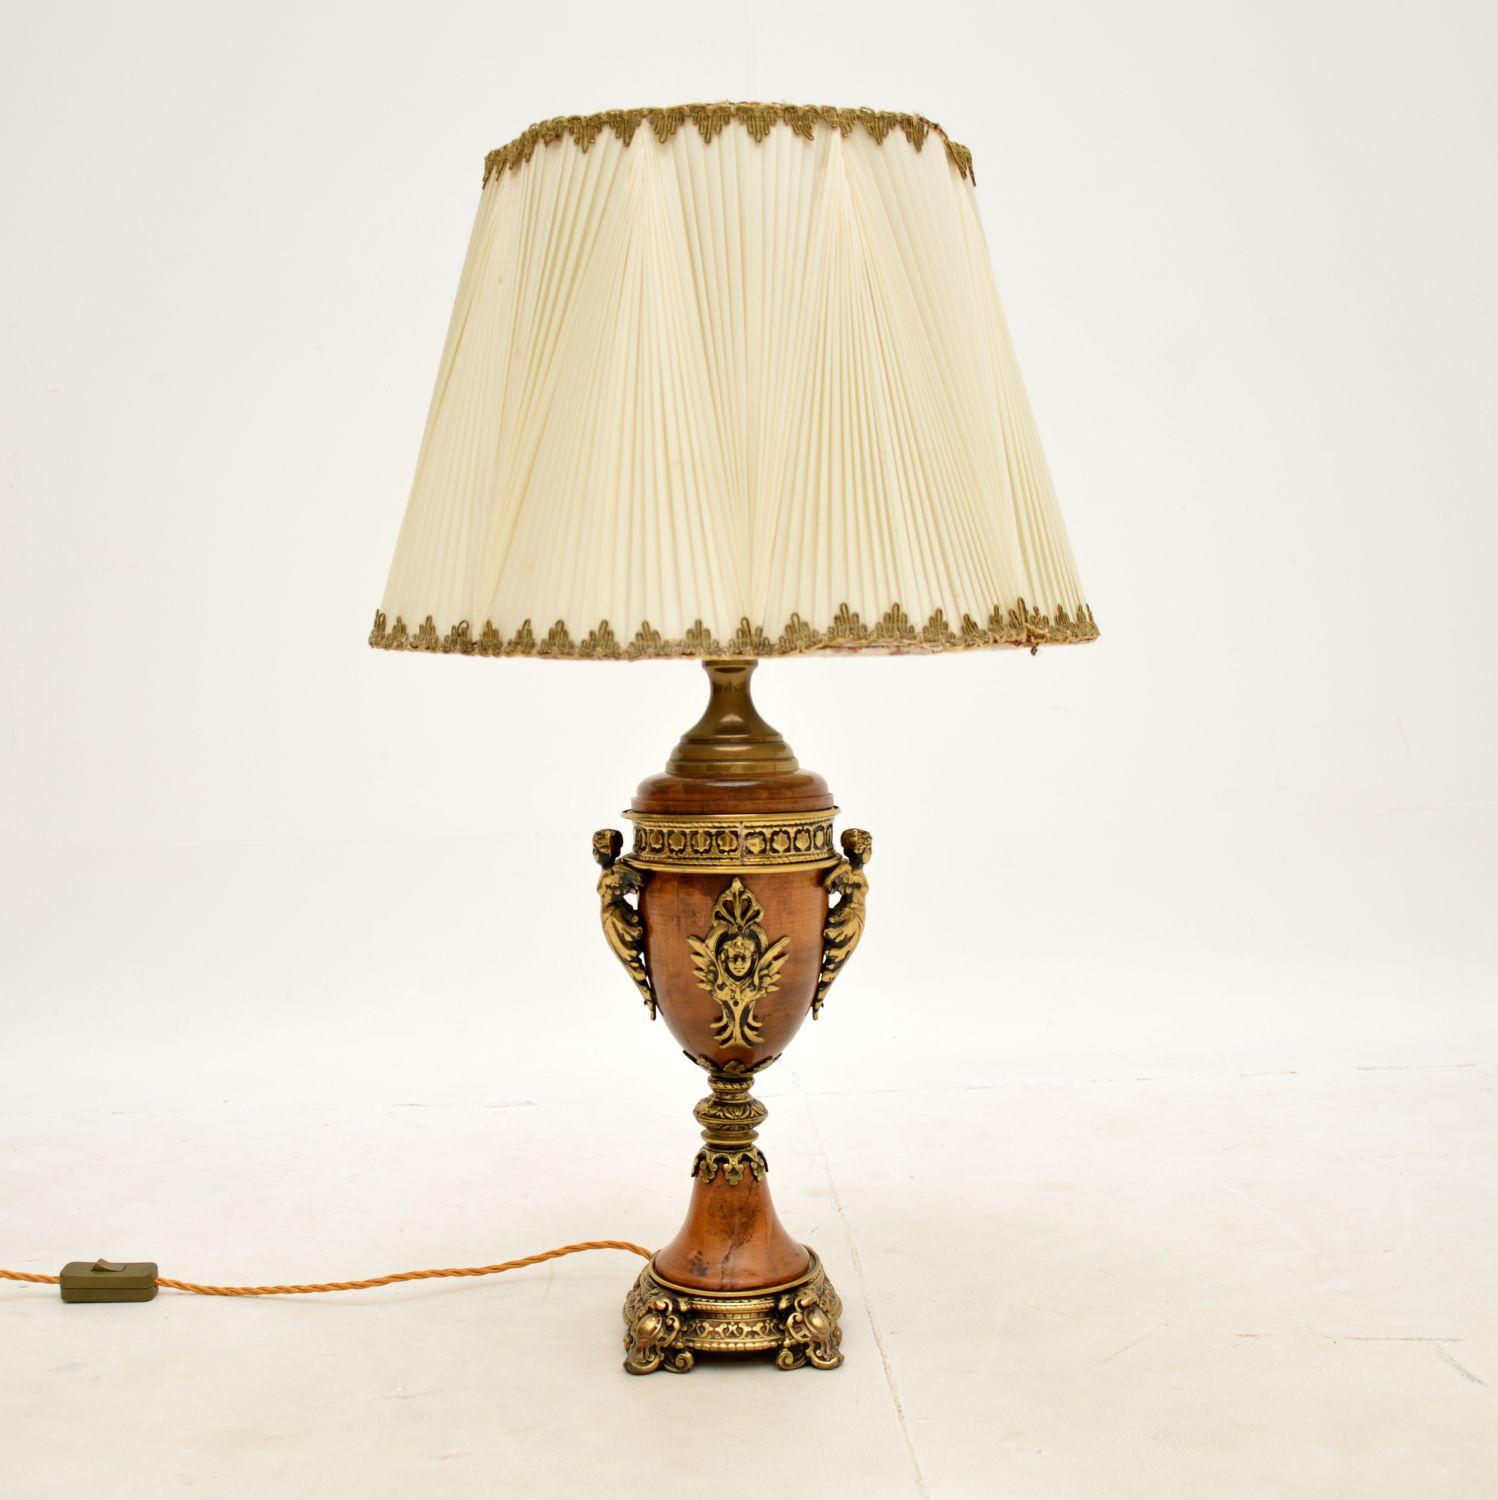 A beautiful and well made vintage French lamp, dating from around the 1950s.

It is of super quality, with ornate gilt metal mounts, it is a large and impressive size.

The condition is very good for its age, with just some minor wear. The silk